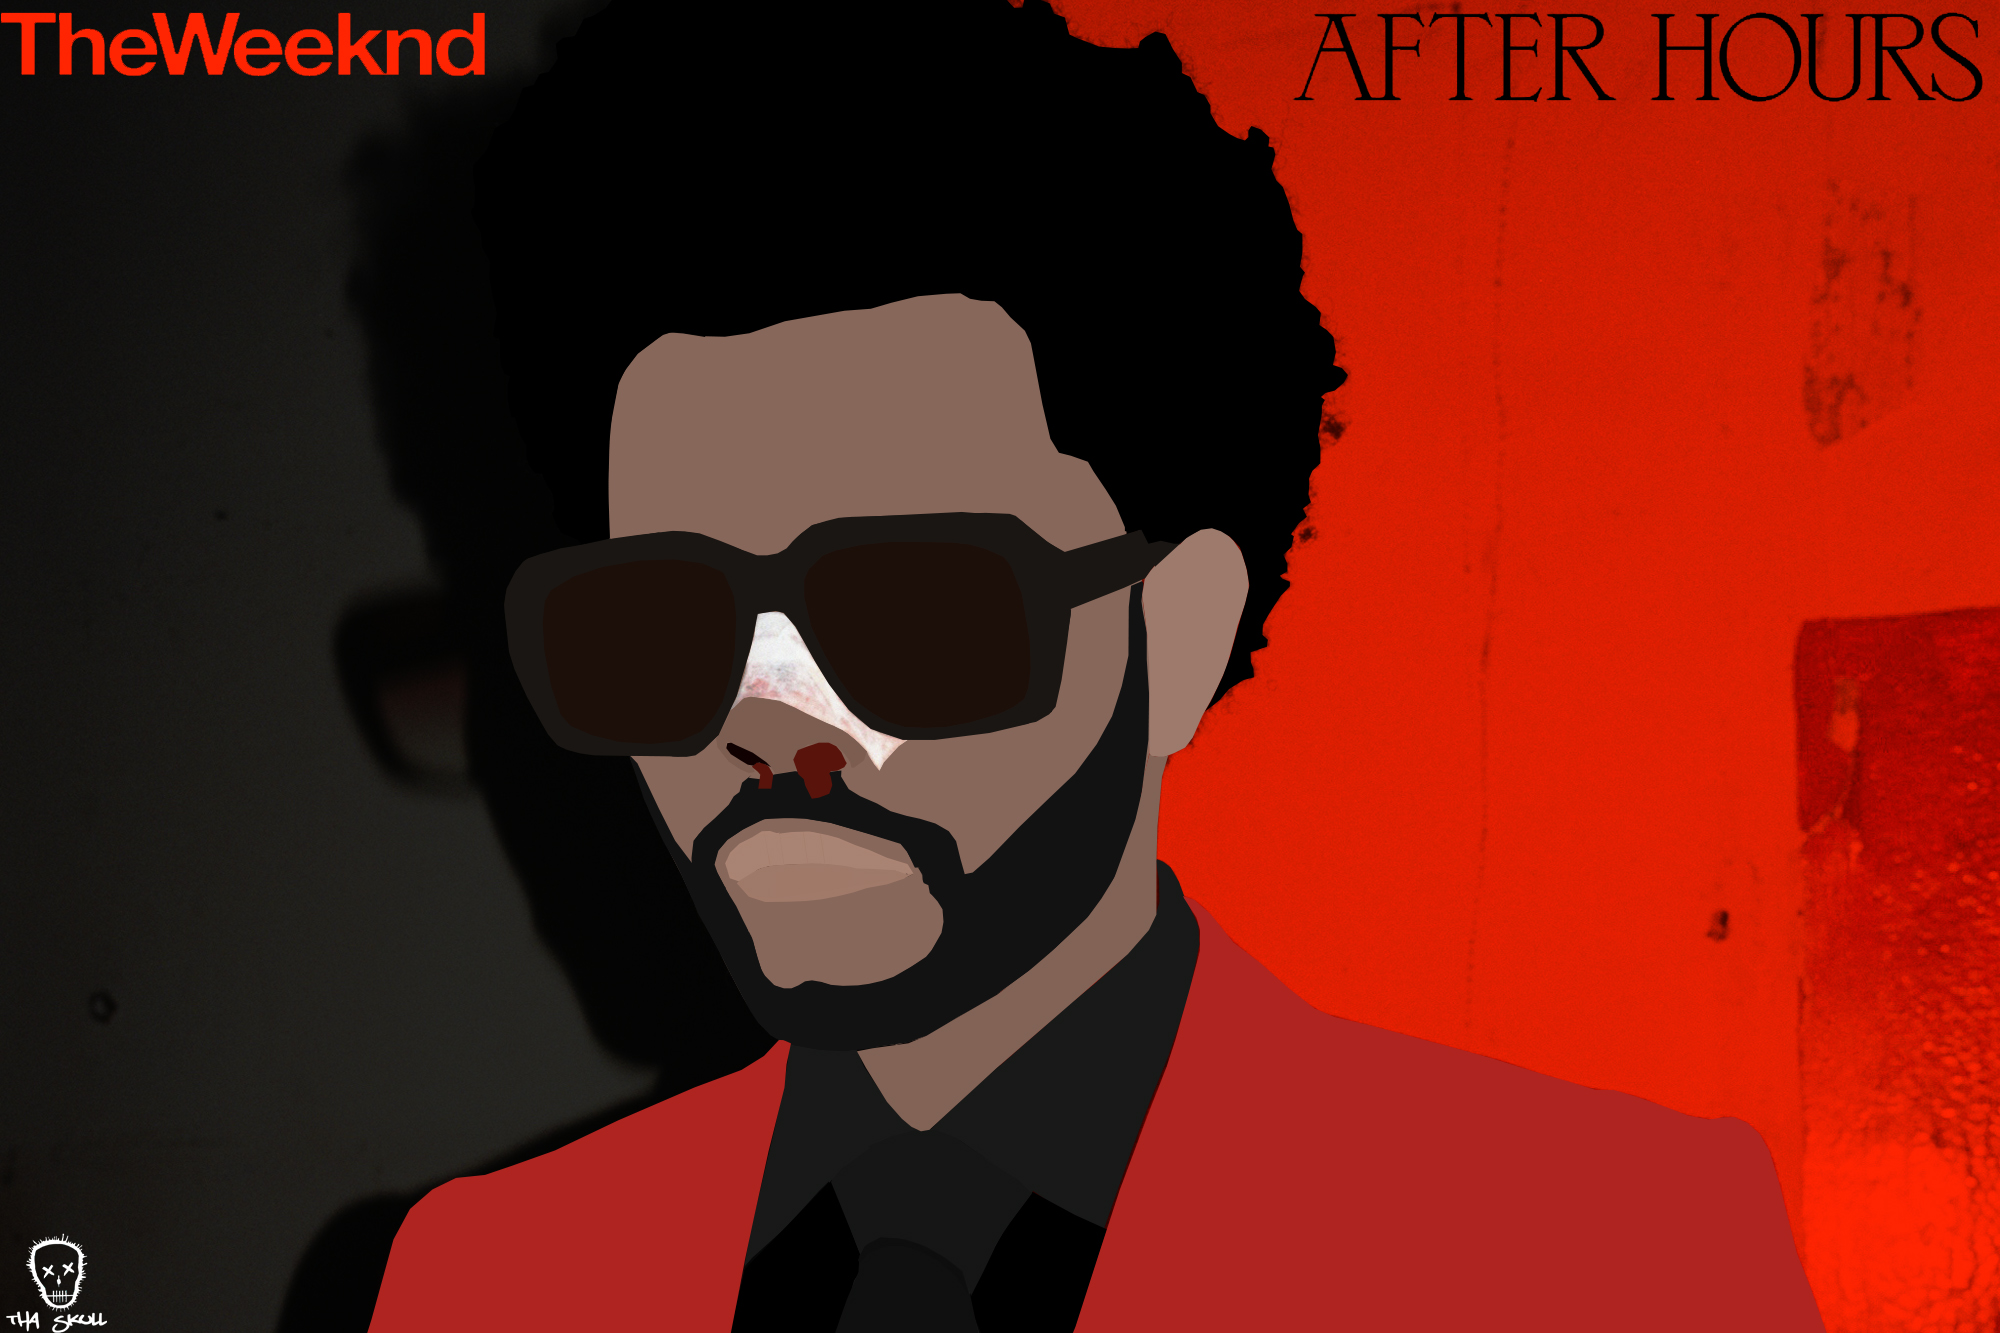 The Weeknd XO After Hours Album Minimalism Material Minimal Flatdesign Red Music 2000x1333